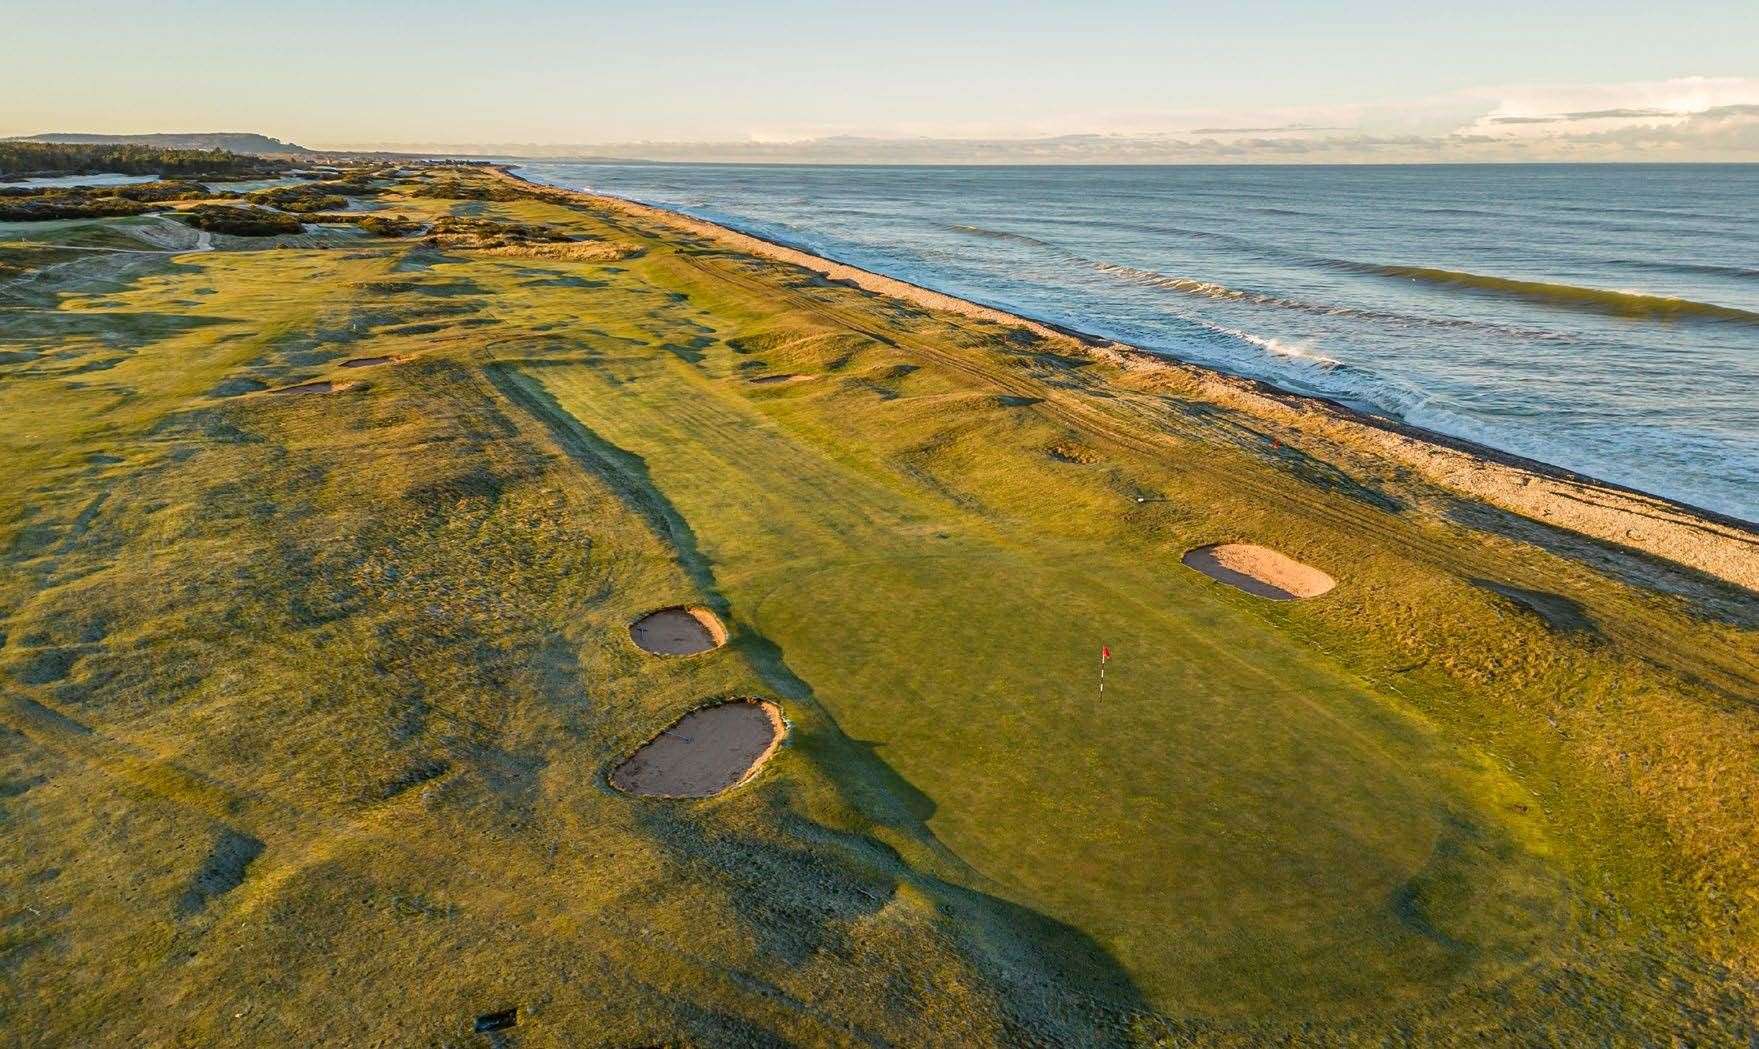 The 18-hole links course has officially been sold.